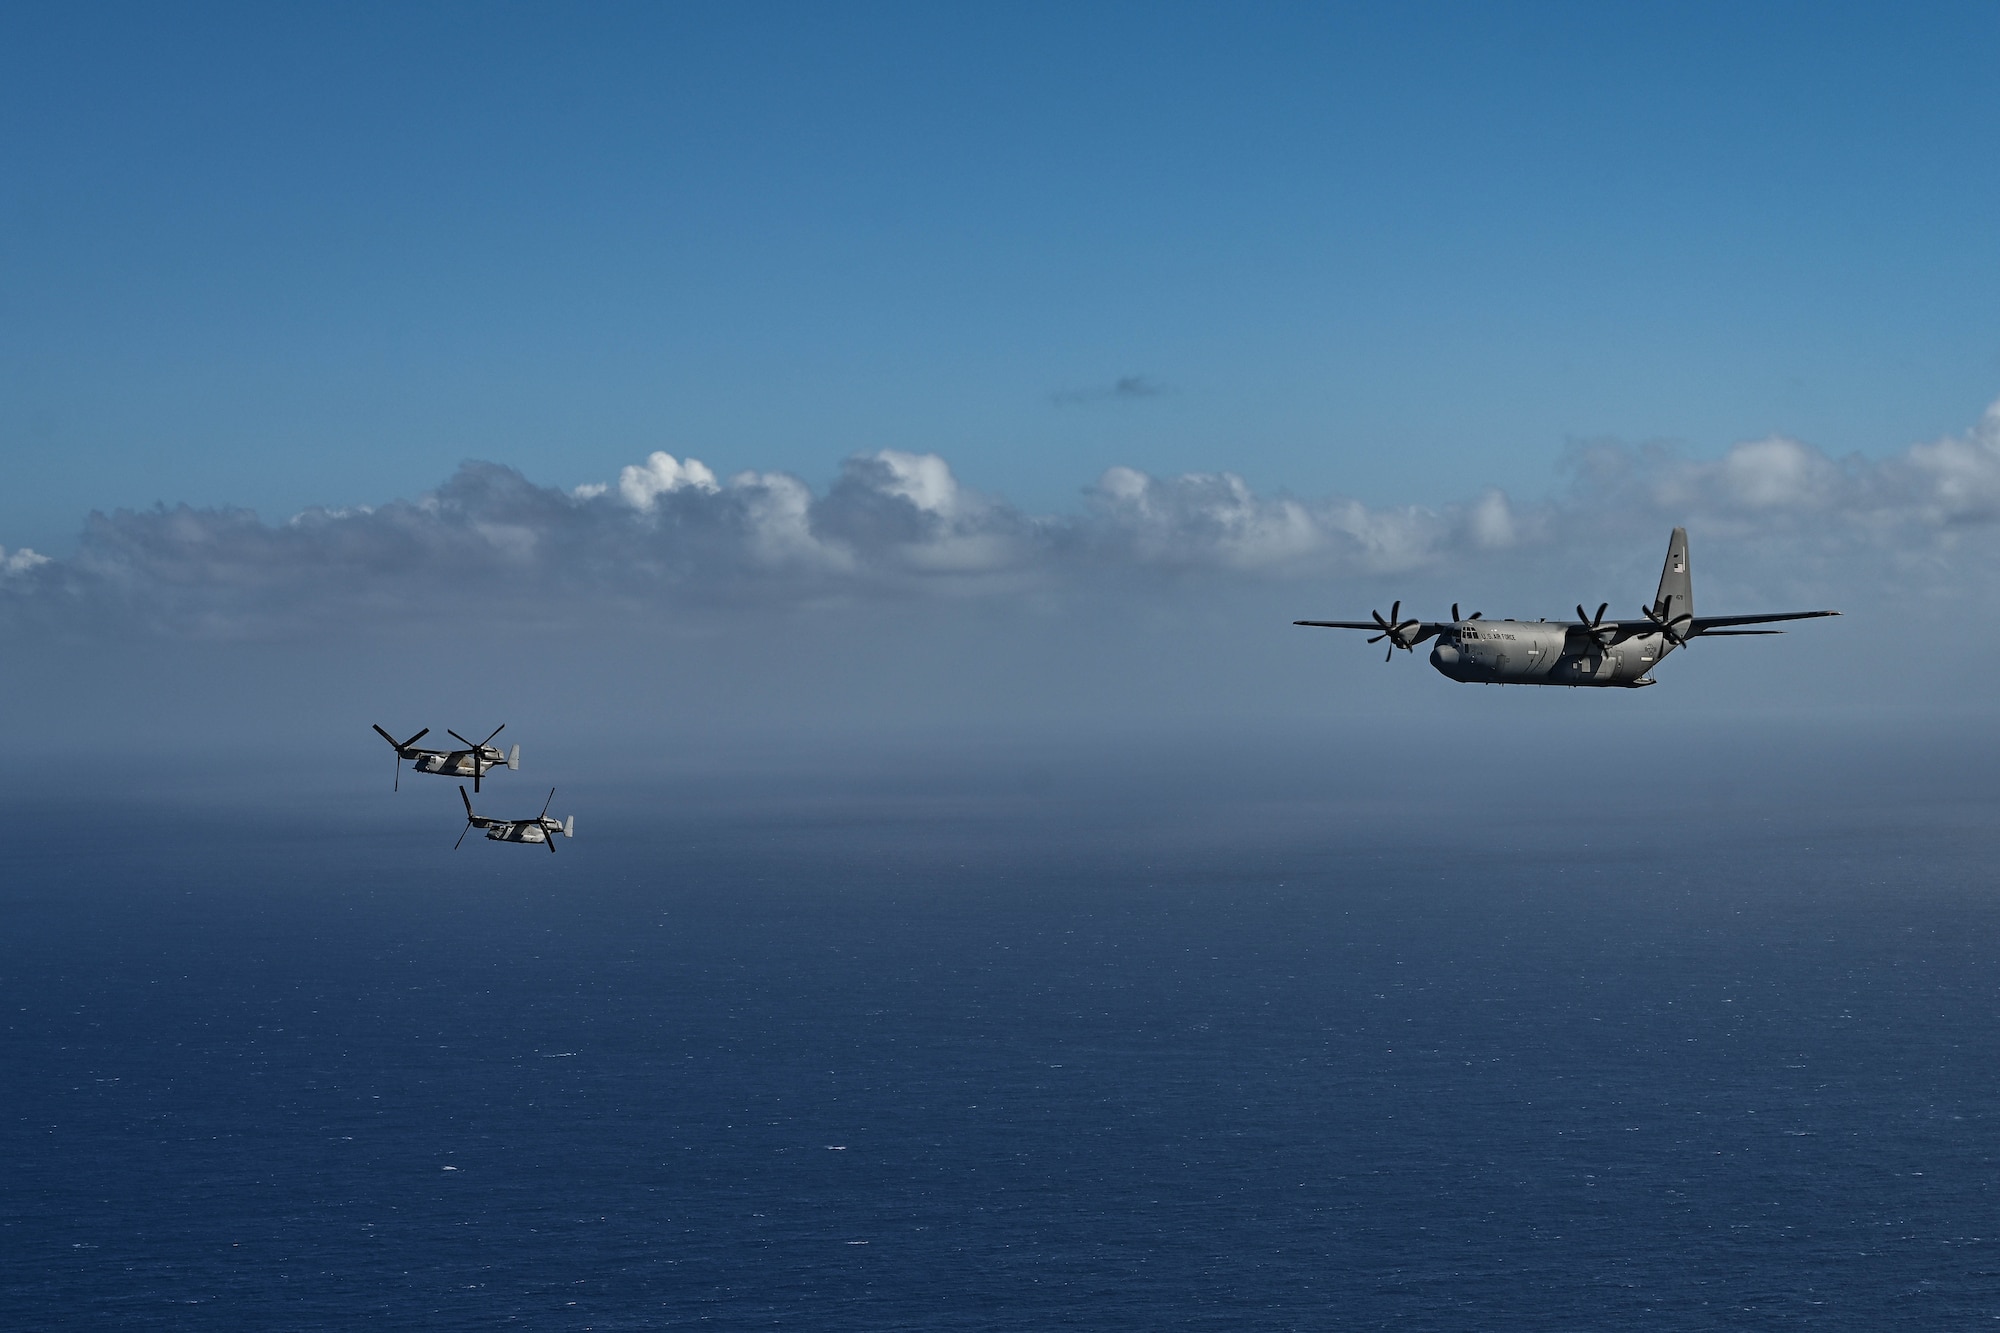 A group of military aircraft fly beside each other over the ocean